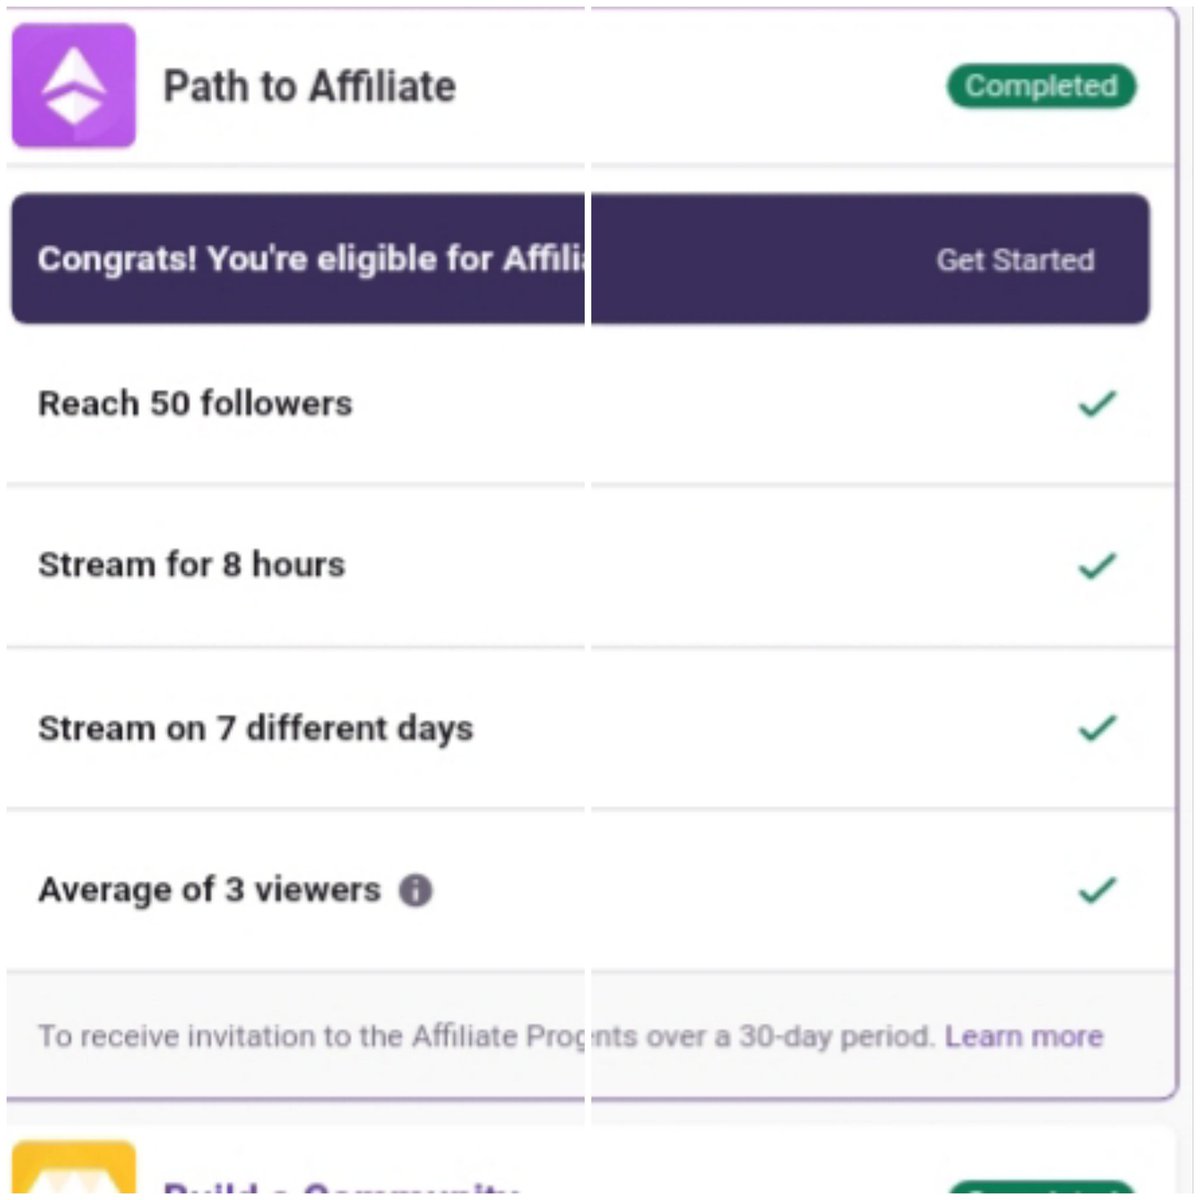 I have too many people to thank for this but know I am truly thankful for all the support and love yall give! Excited to keep growing and seeing how far I can take this! #affiliate #goals #support #communitygrowing